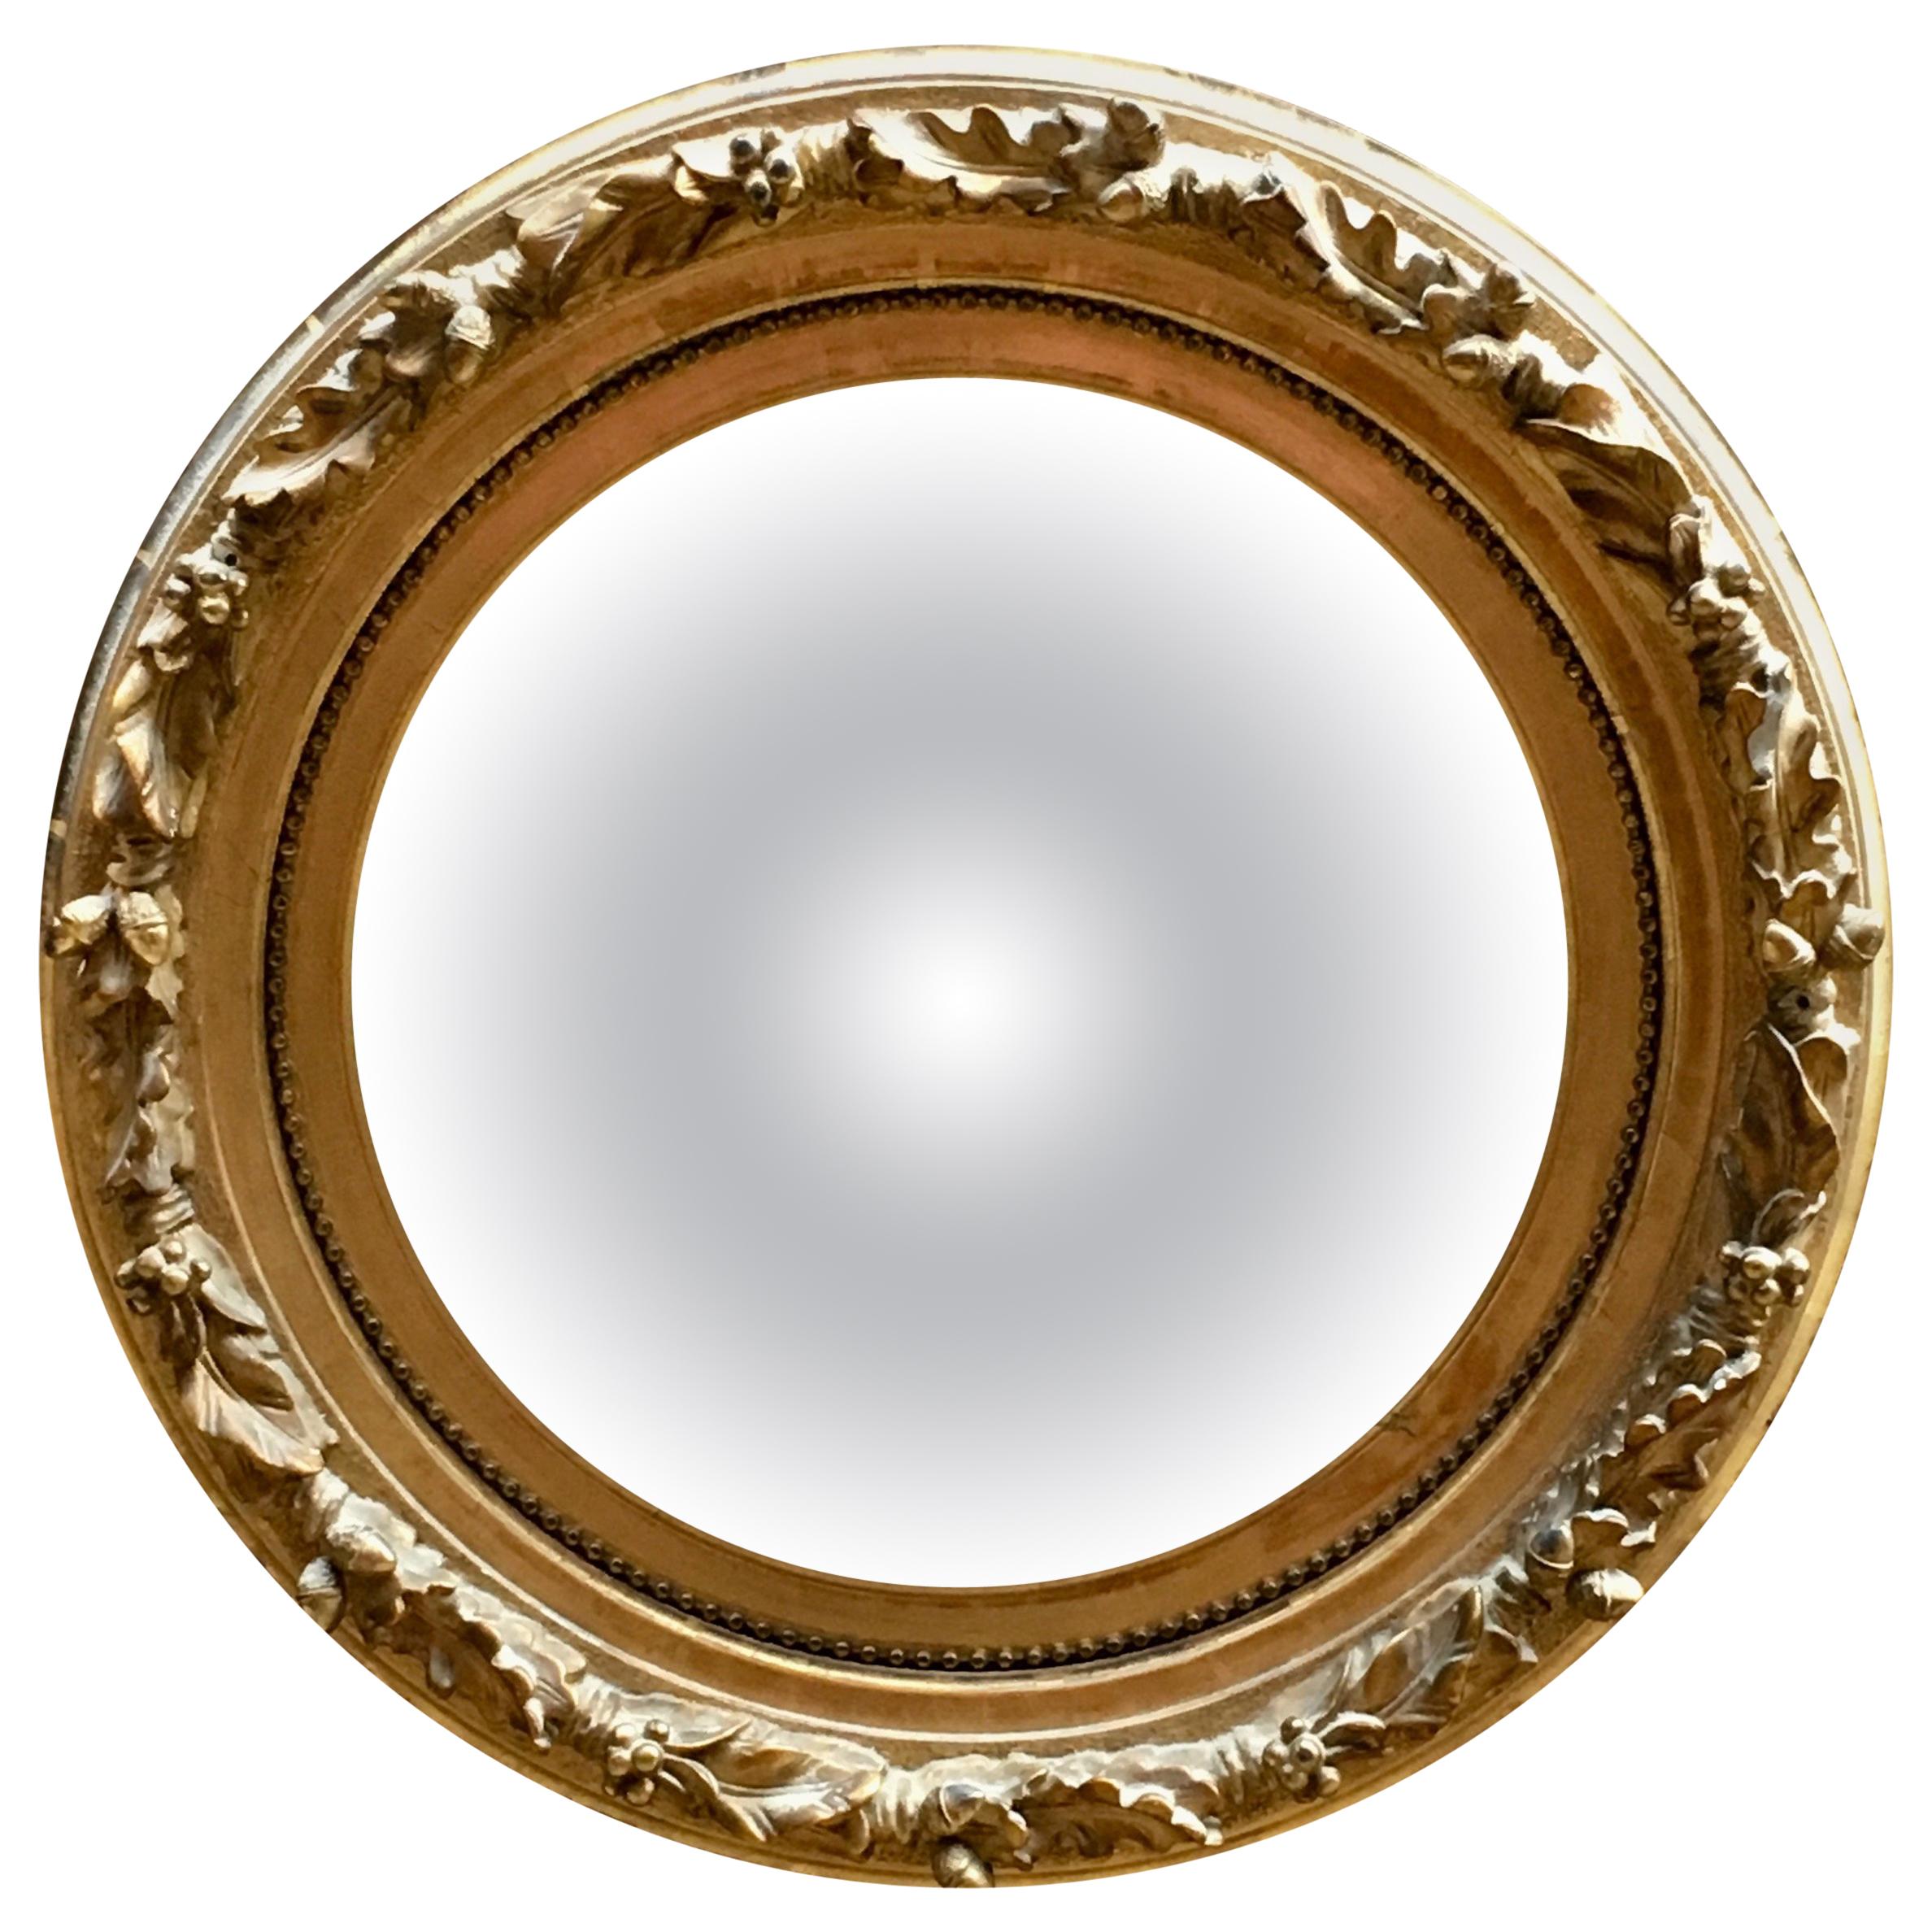 Early Water Gilded Acorn and Leaf Convex Mirror